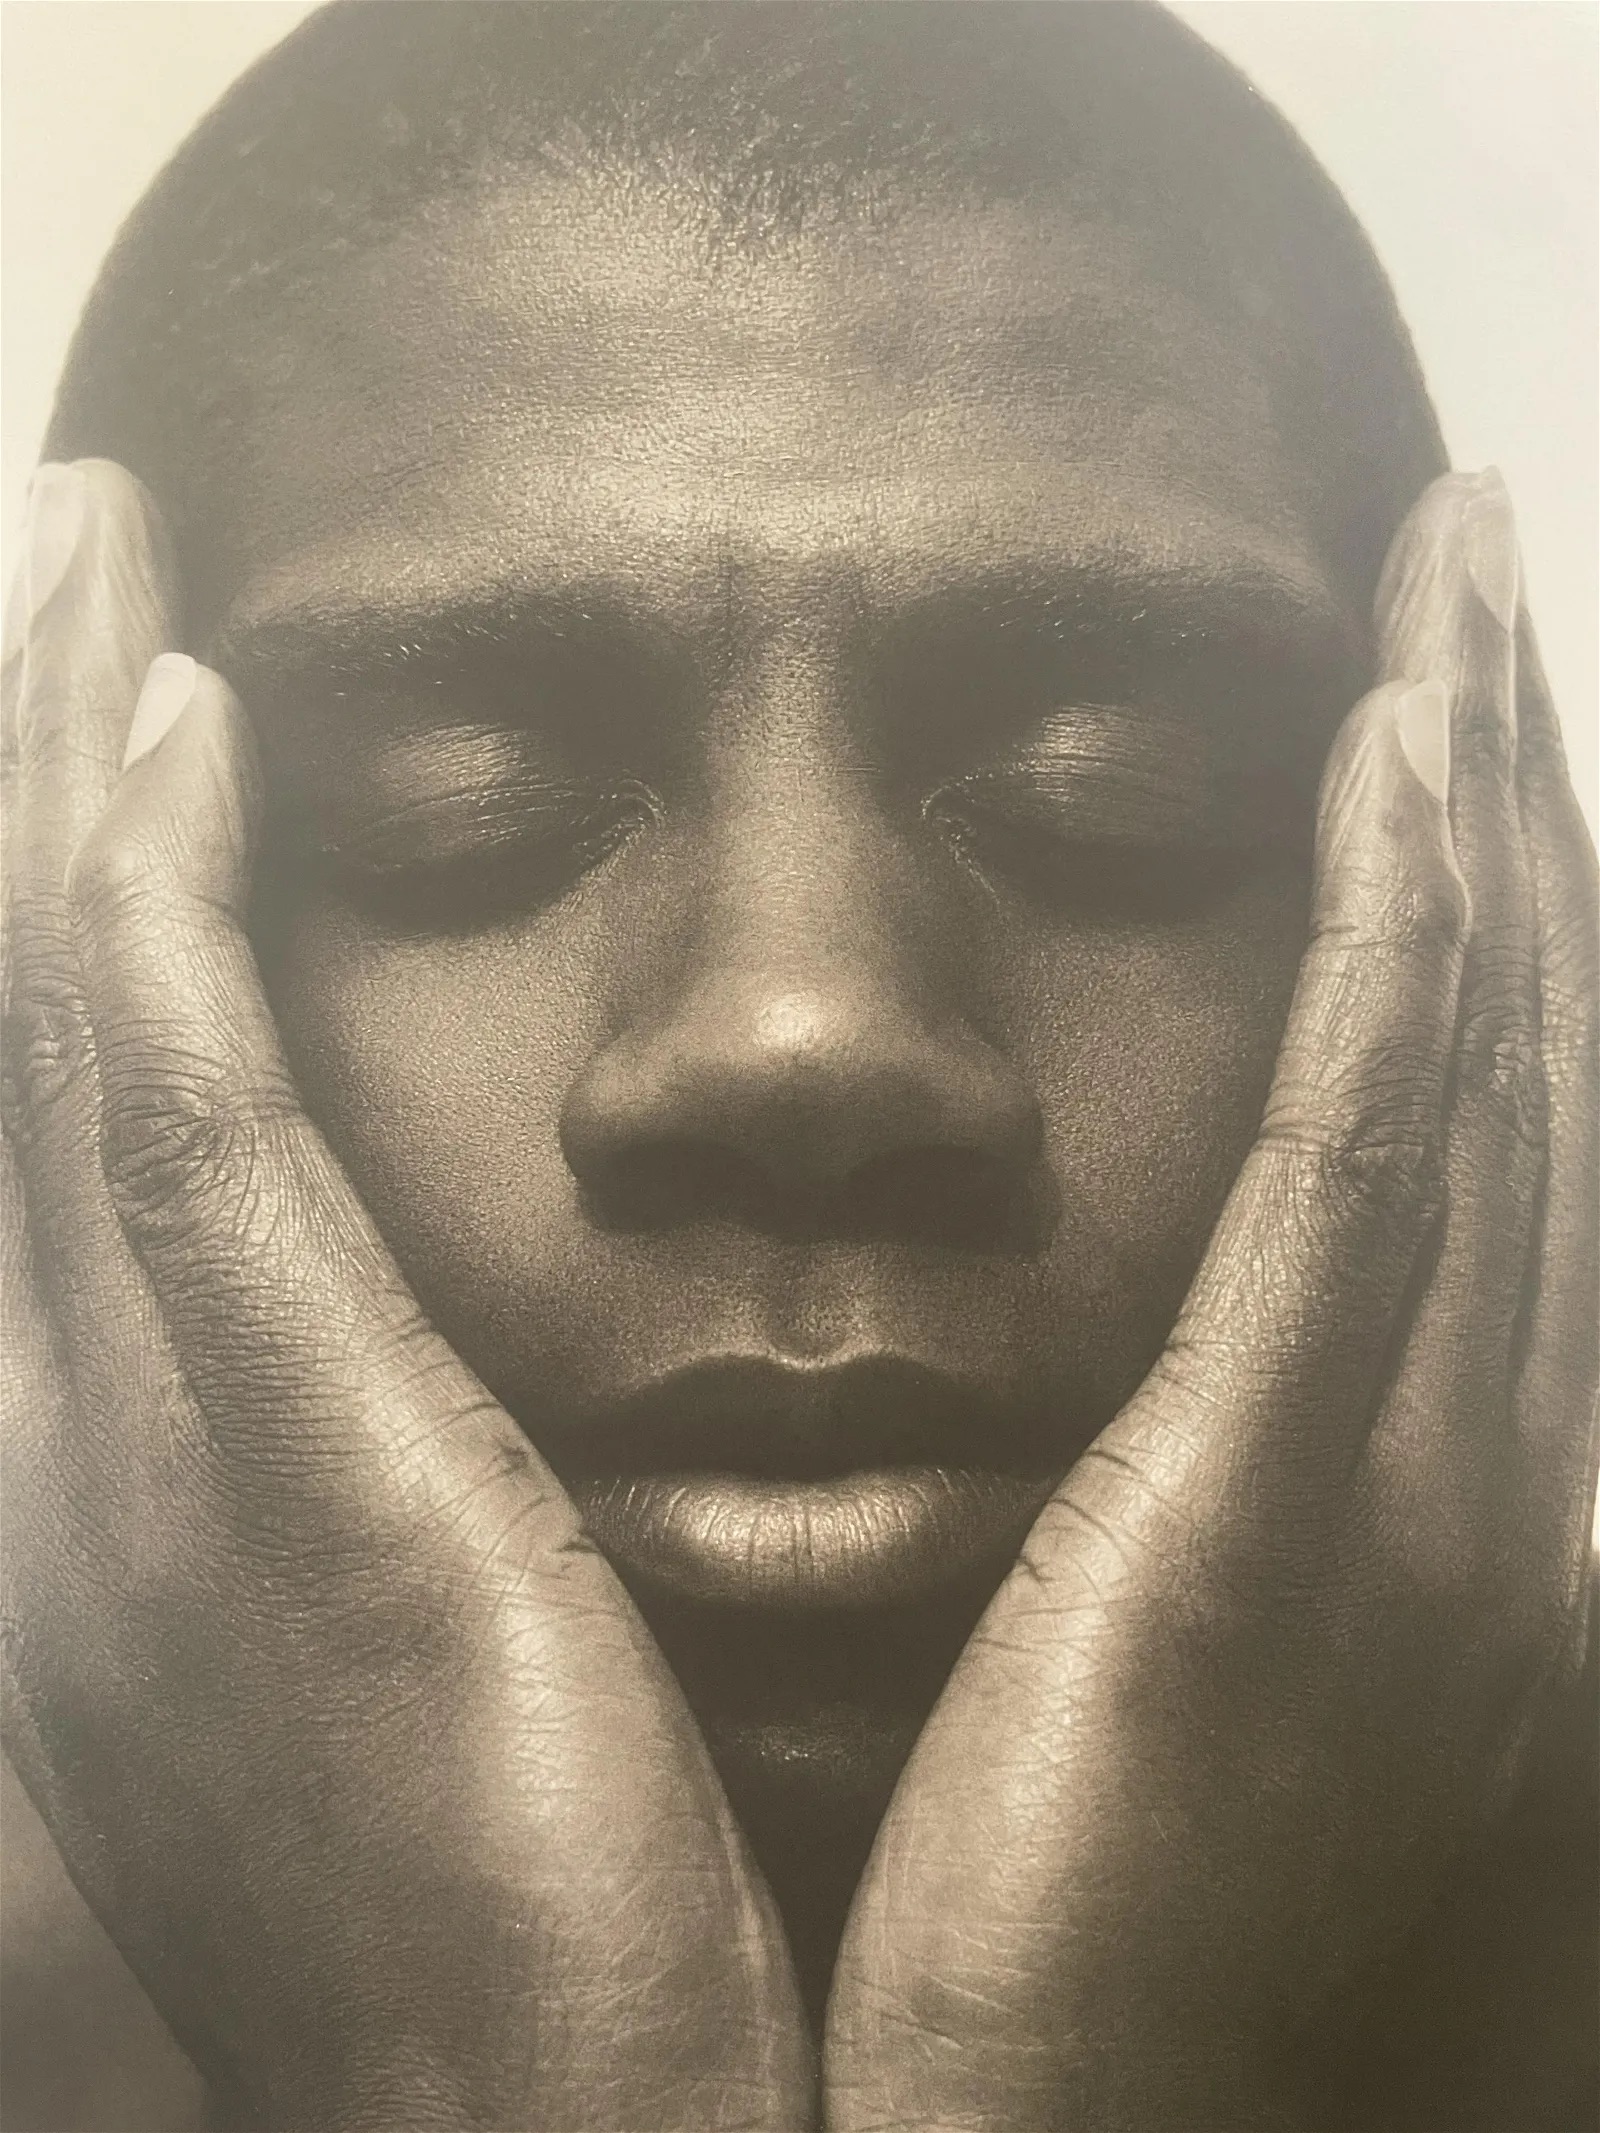 Herb Ritts "Earvin Magic Johnson, Hollywood, 1992" Print - Image 2 of 5